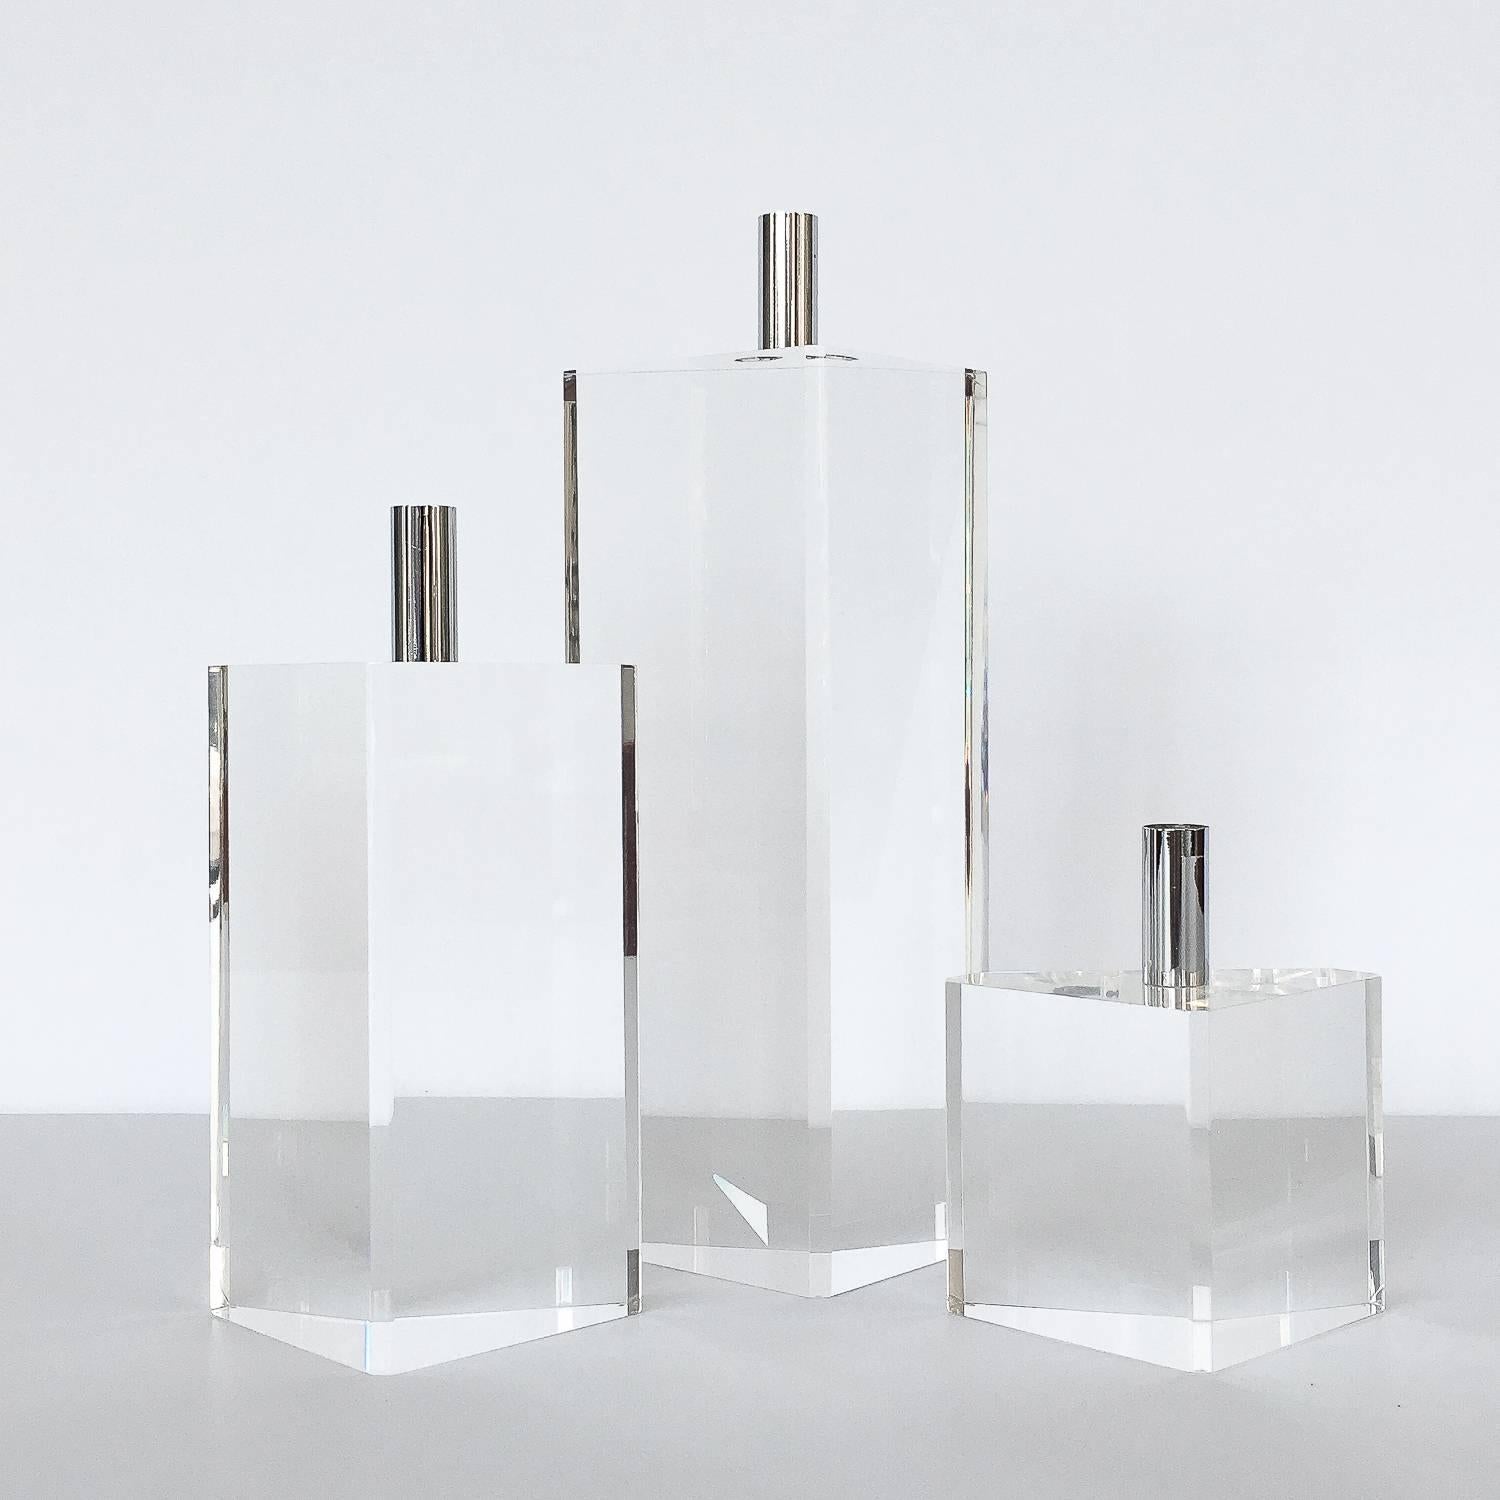 Set of three faceted solid Lucite and chrome candlesticks. Set of three graduated triangular shaped solid Lucite candle holders with chrome cylindrical cups. Chrome cylinders measure 1.25